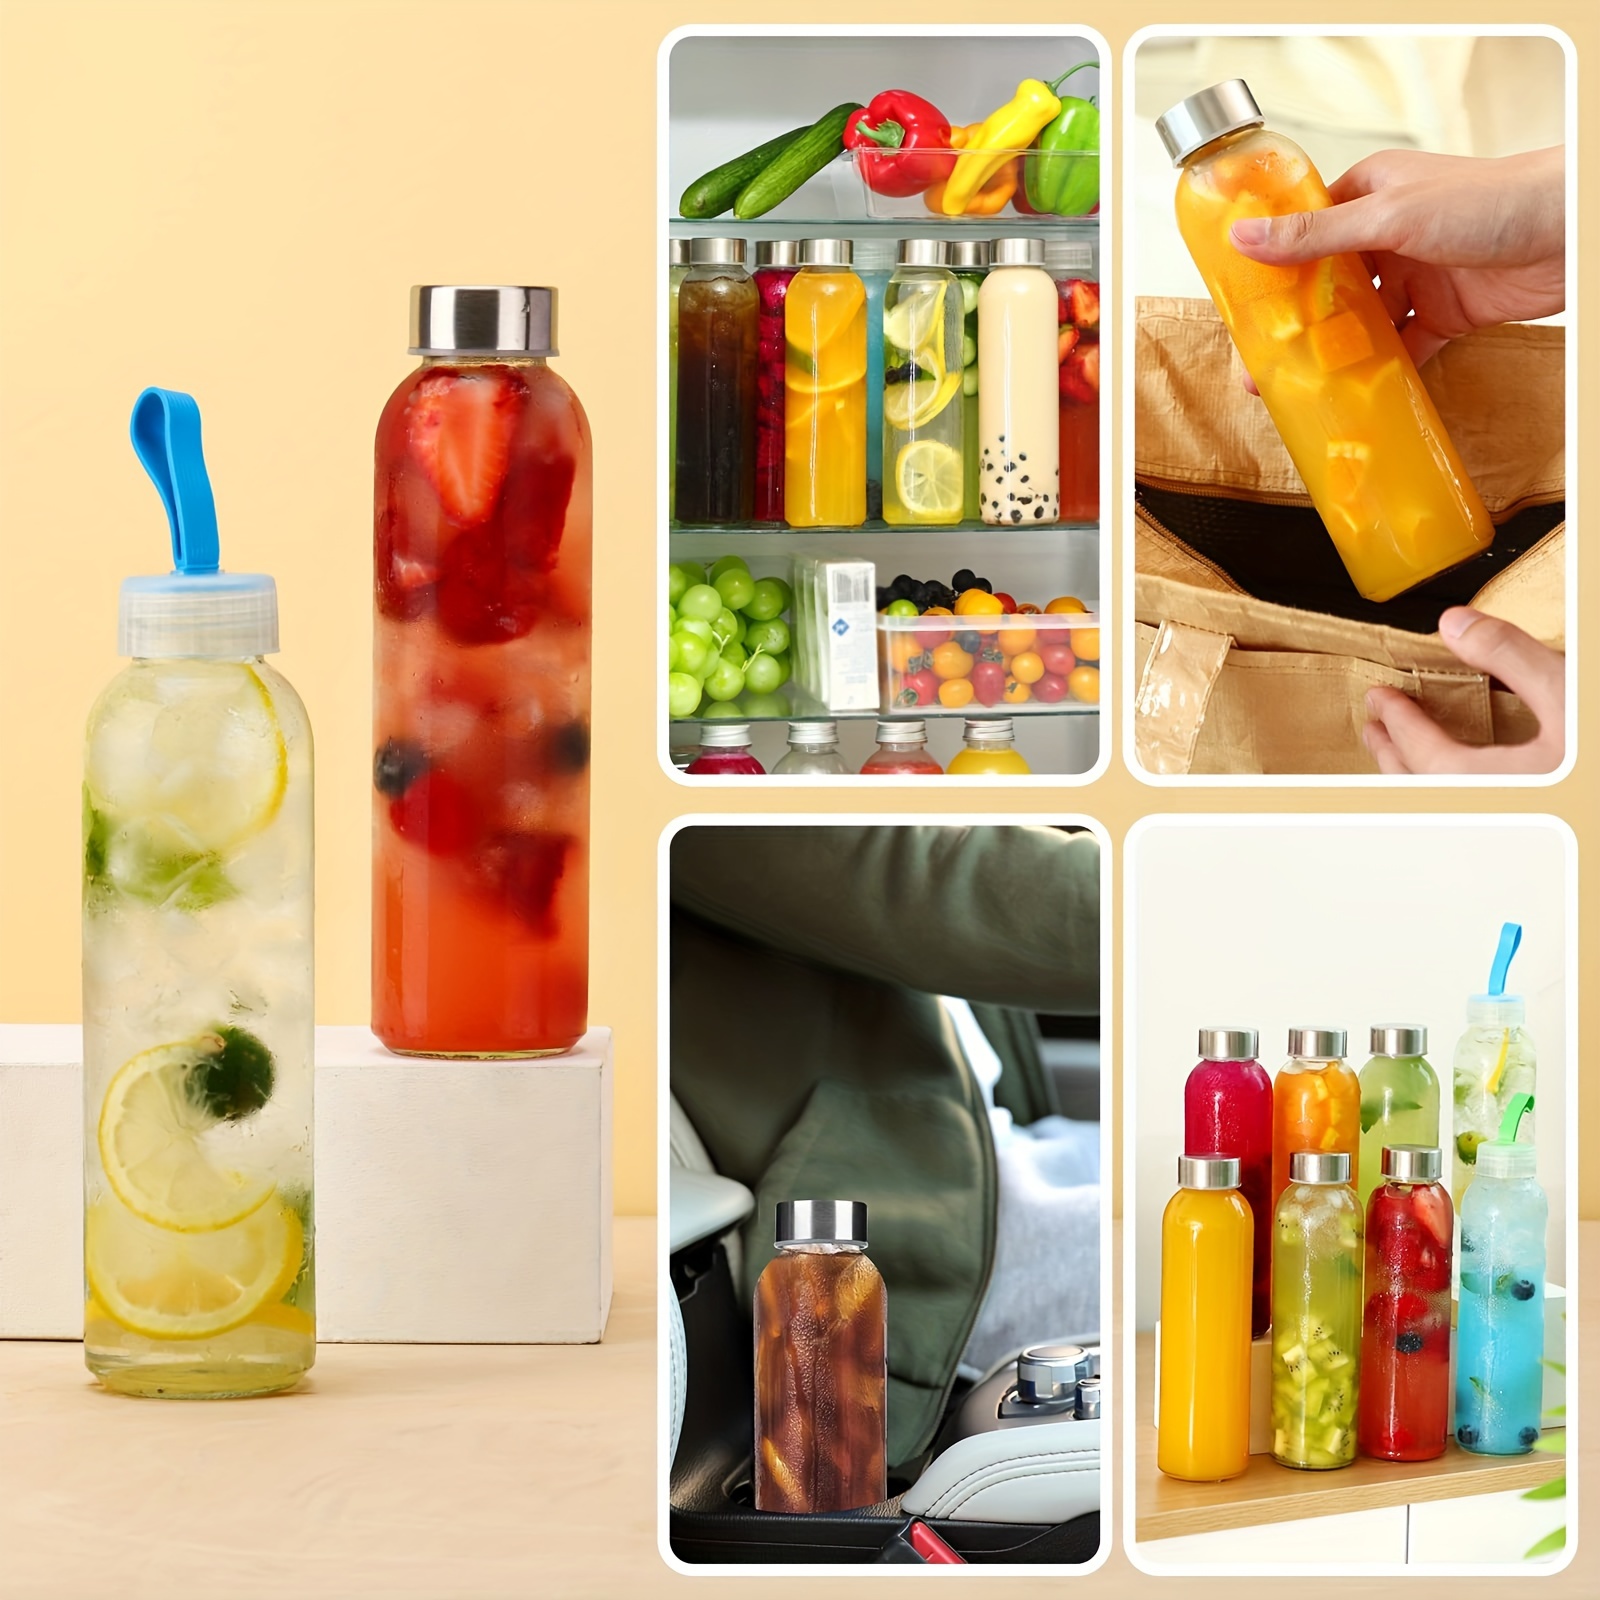 24pcs 12oz Glass Juice Bottles, Reusable Glass Bottles with Caps and Straws